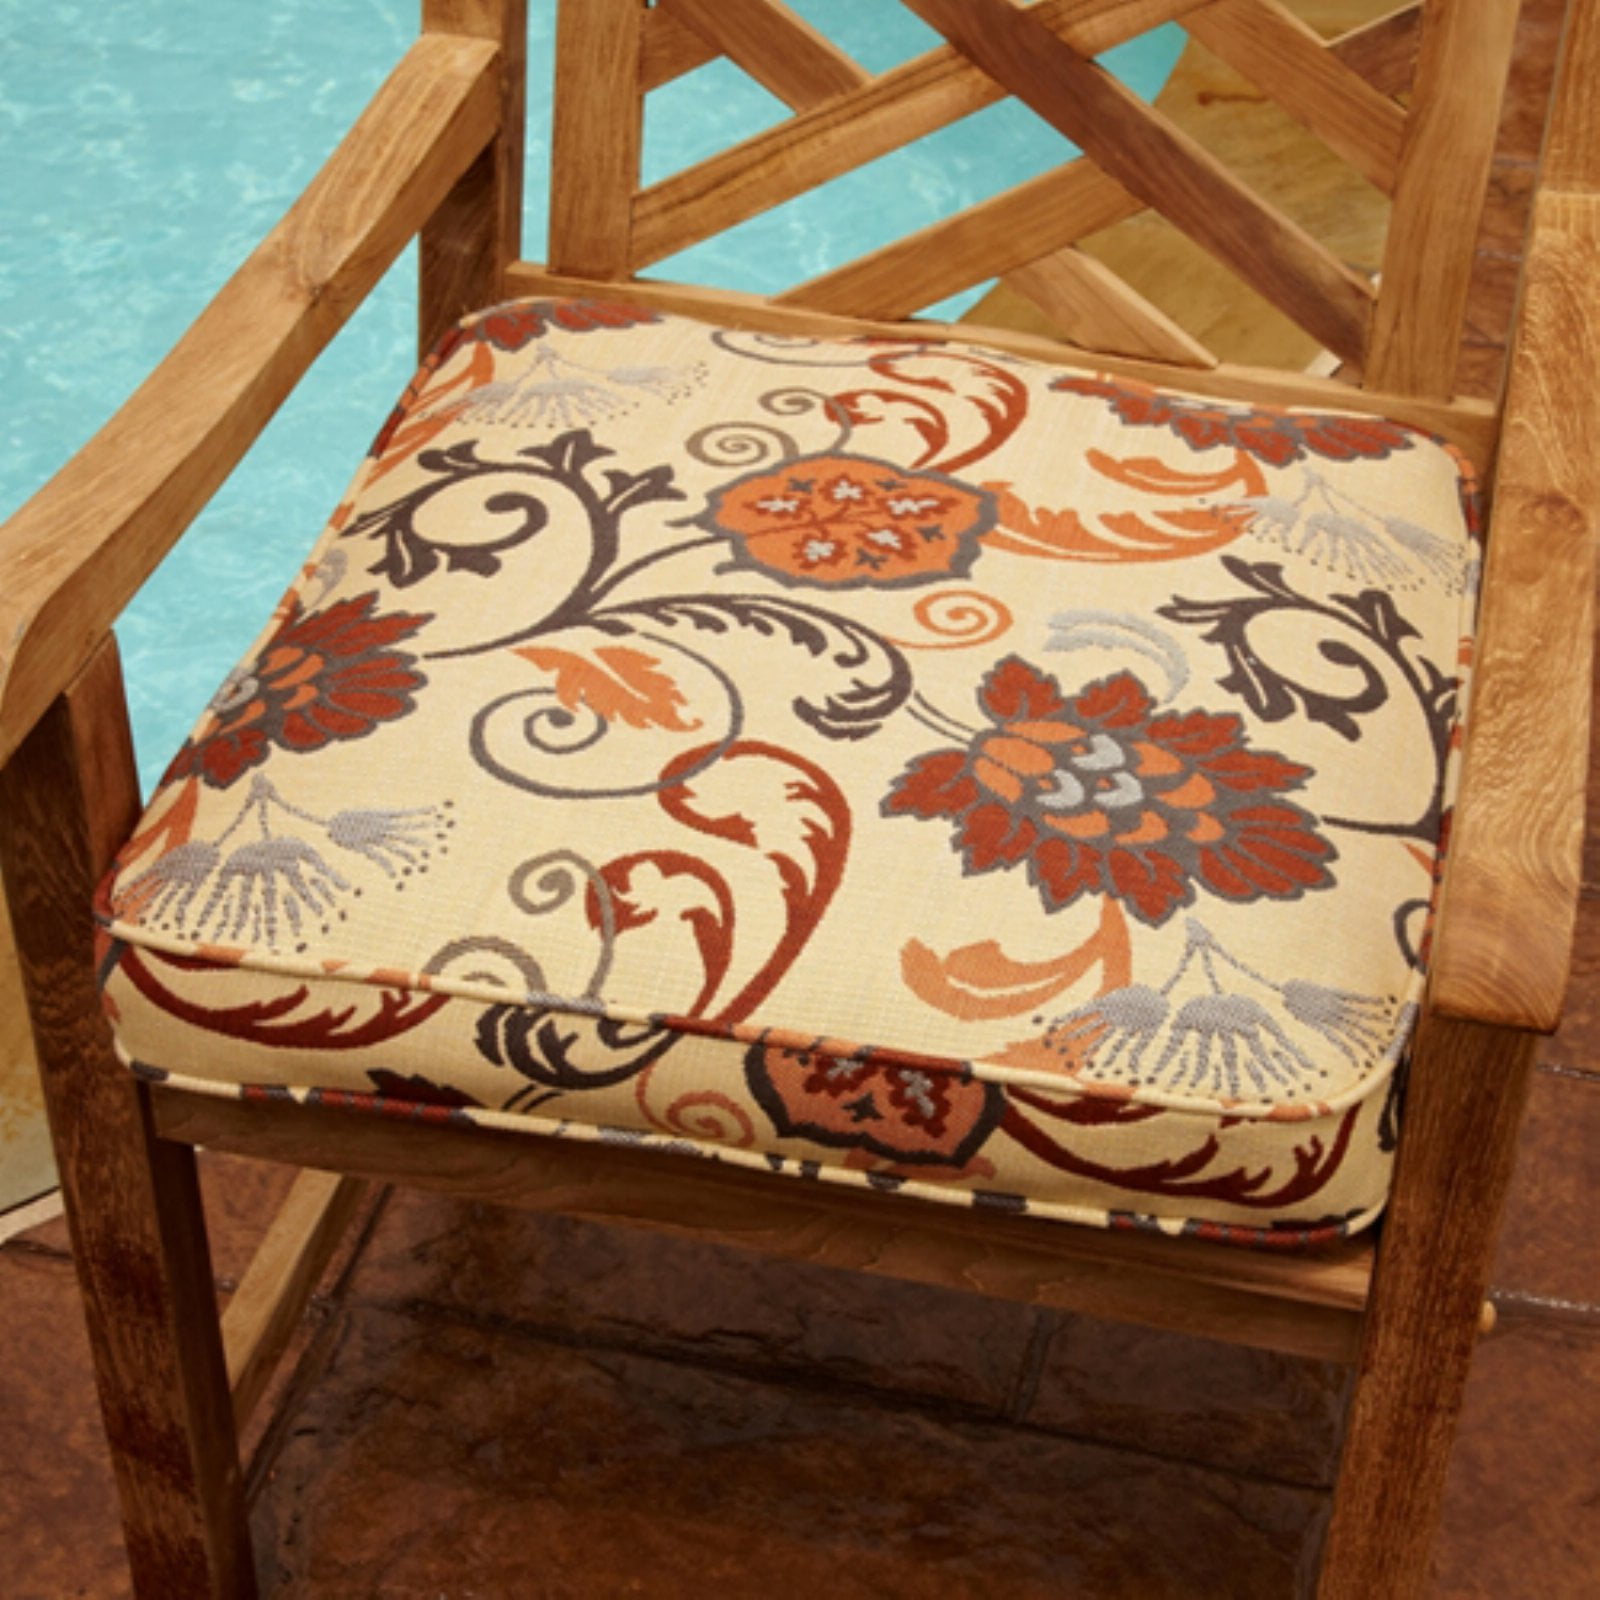 Seat Patio Chair Cushion, Sunbrella Outdoor Dining Chair Cushions With Ties